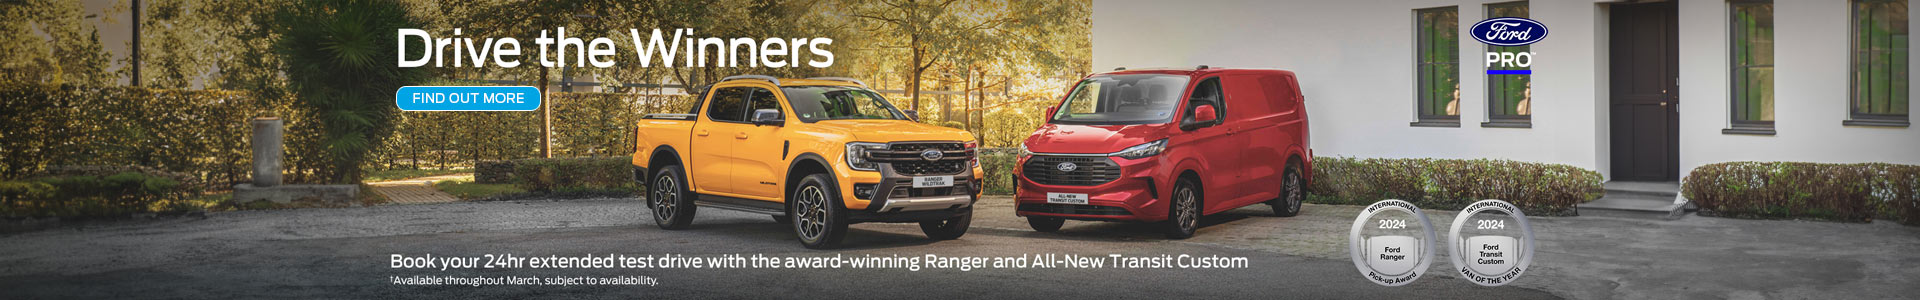 Drive the Winners - Test Drive the Ford Ranger and All-New Transit Custom.